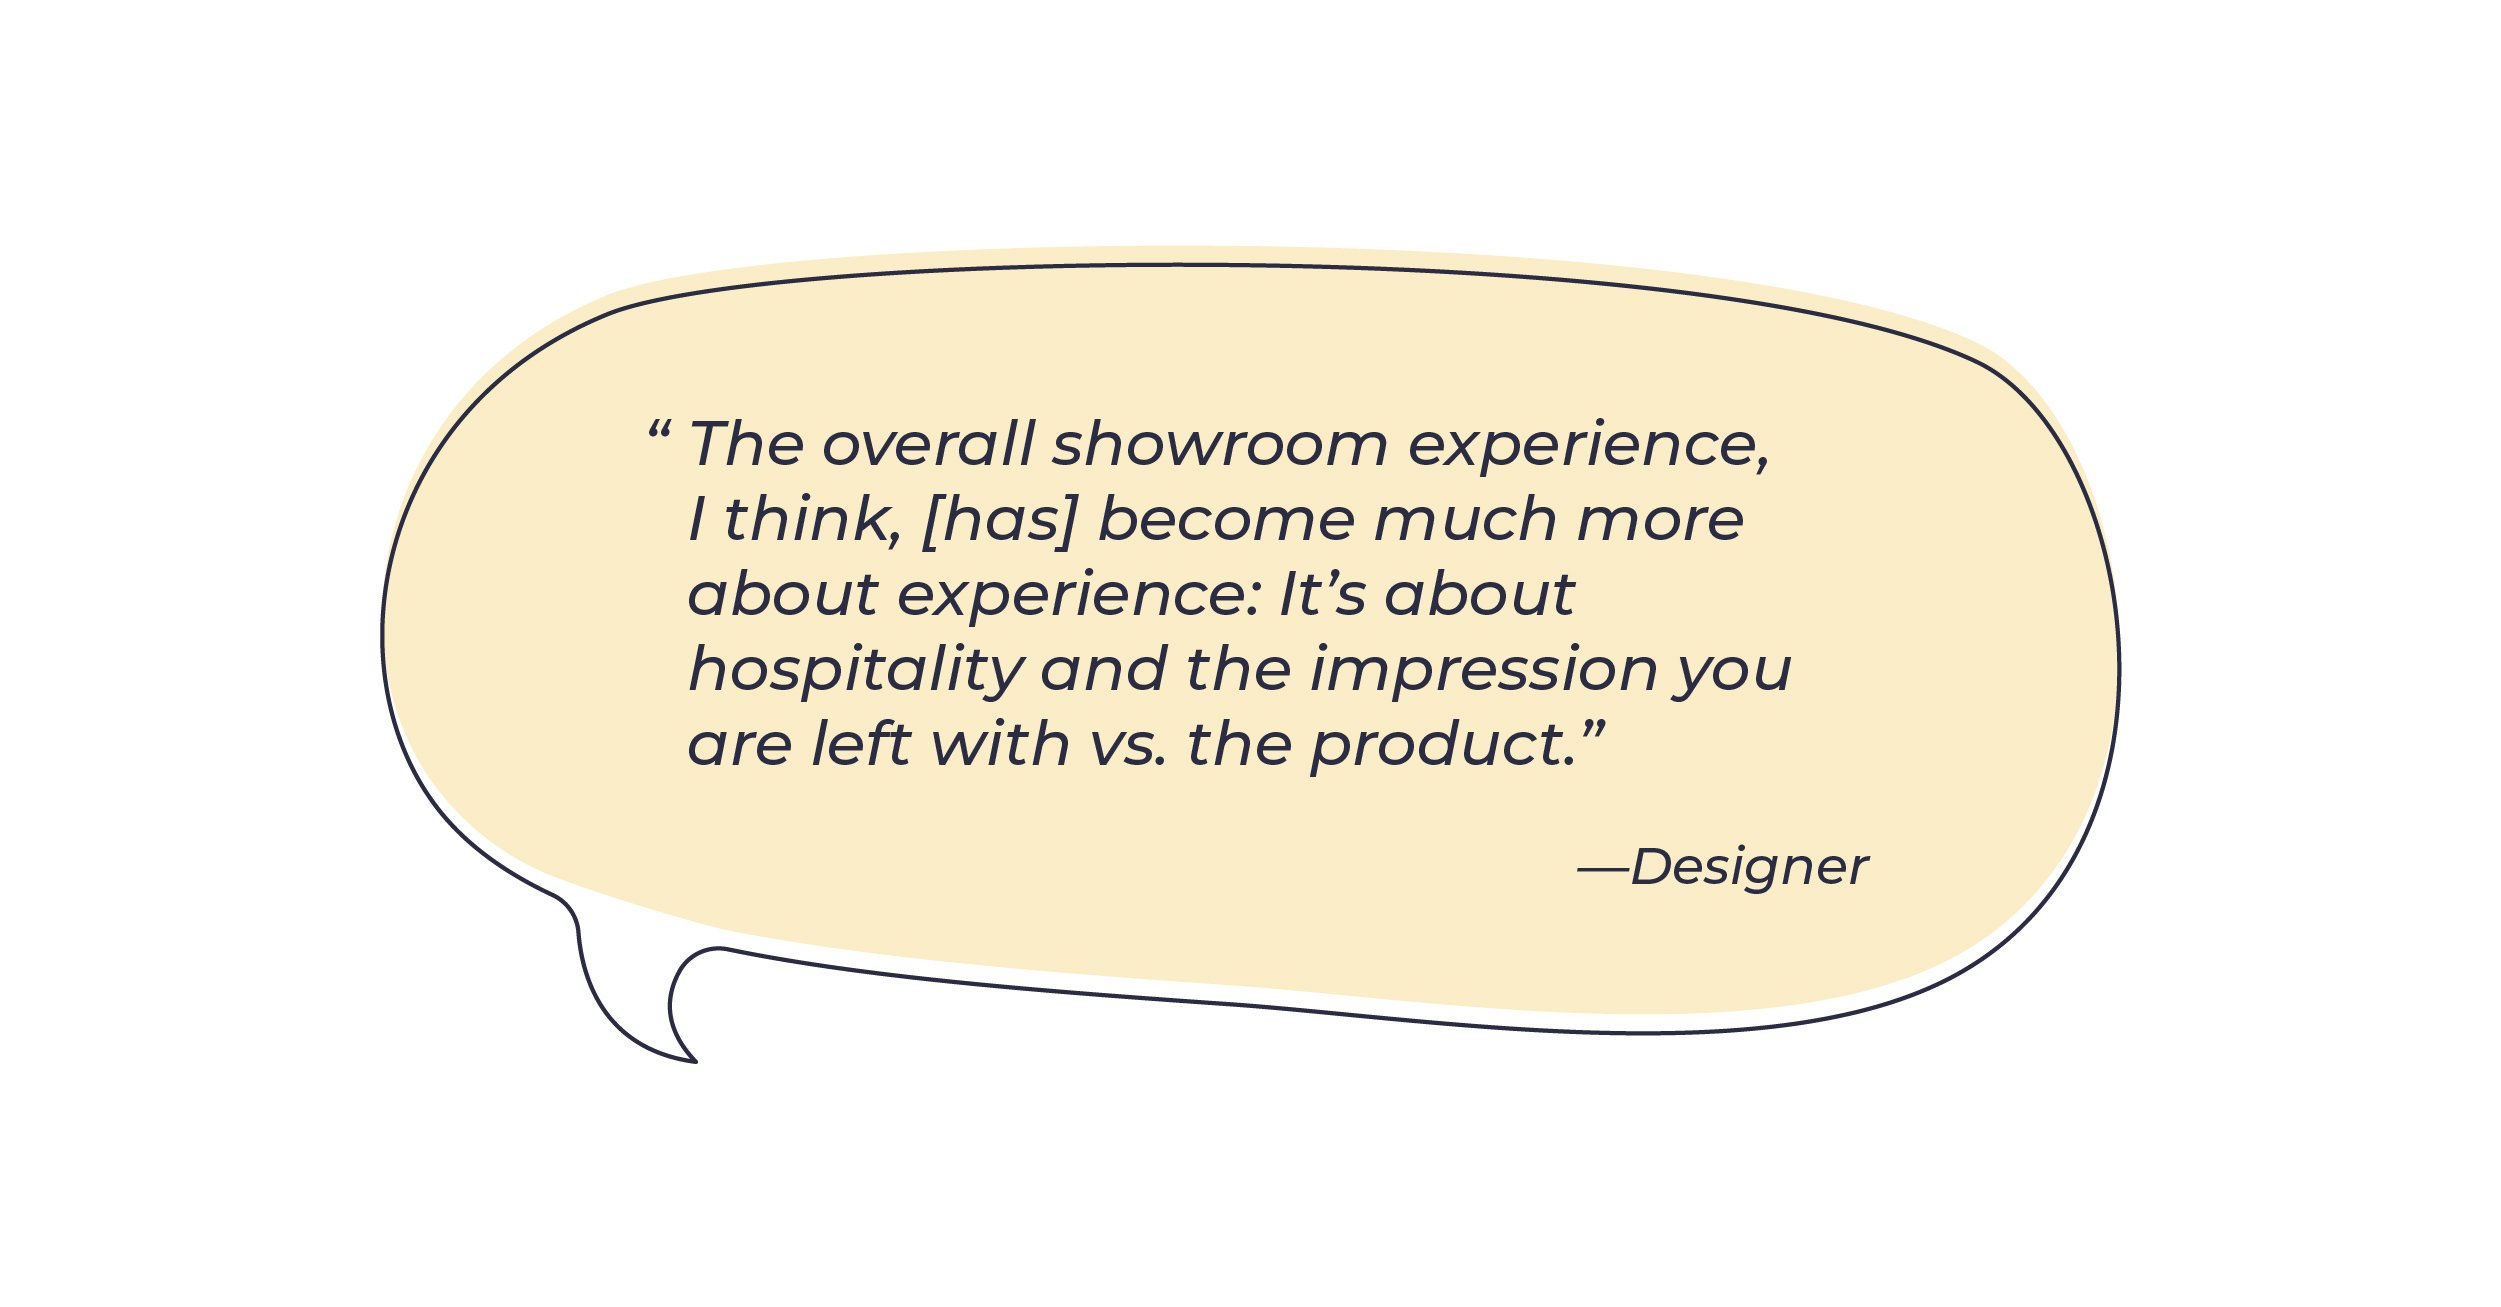 Quote from an interior designer about how the contract design showroom experience  has become more about hospitality and creating an experience that leaves you with an impression about the brand versus the product